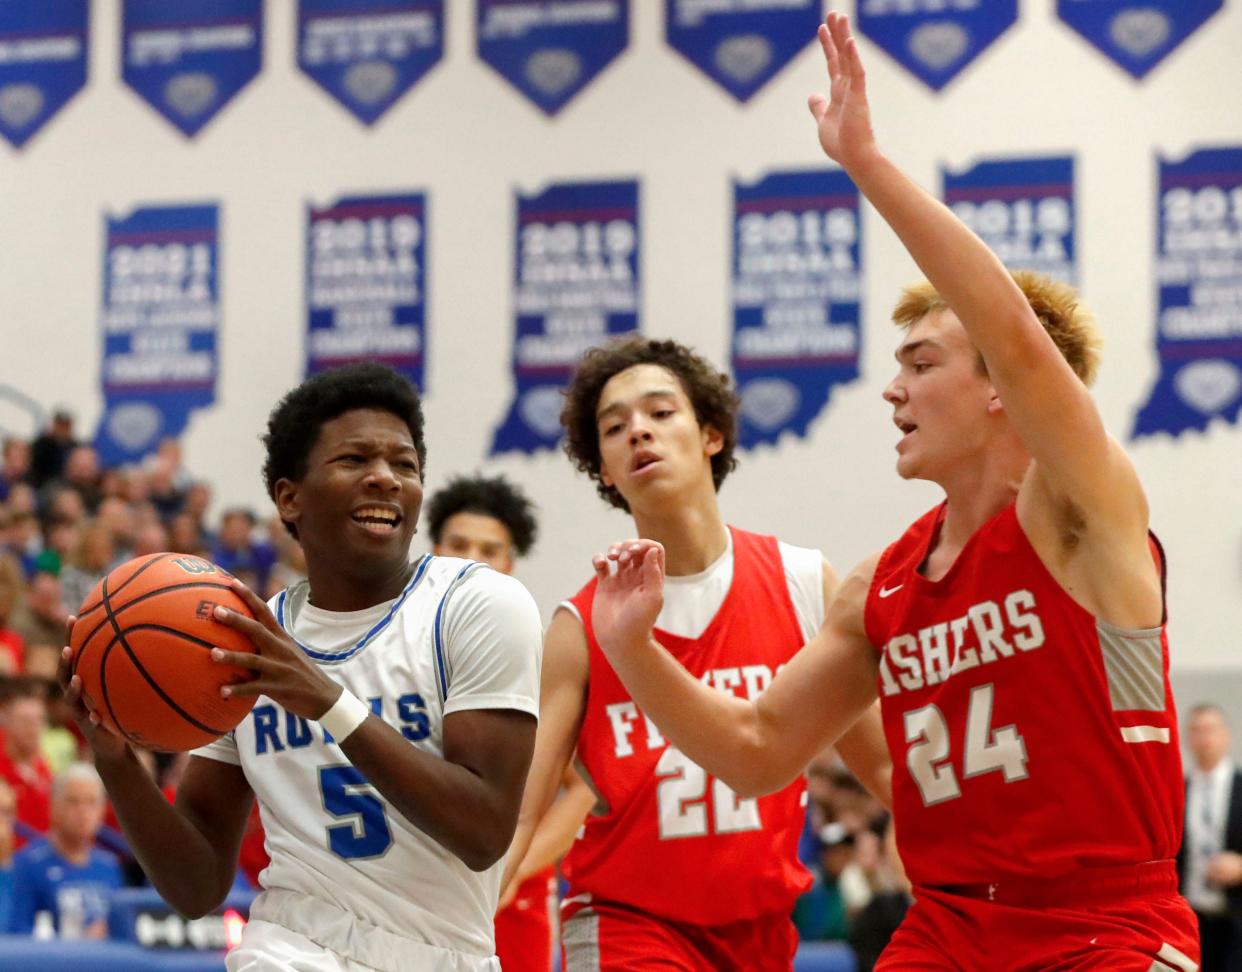 Hamilton Southeastern's Deion Miles (5) goes for a lay-up while being blocked by Fishers High School's Charlie Smith (24) during the first half of a game Friday, Dec. 17, 2021, at Hamilton Southeastern High School. The Fishers High School Tigers defeated the Hamilton Southeastern Royals 70-68.